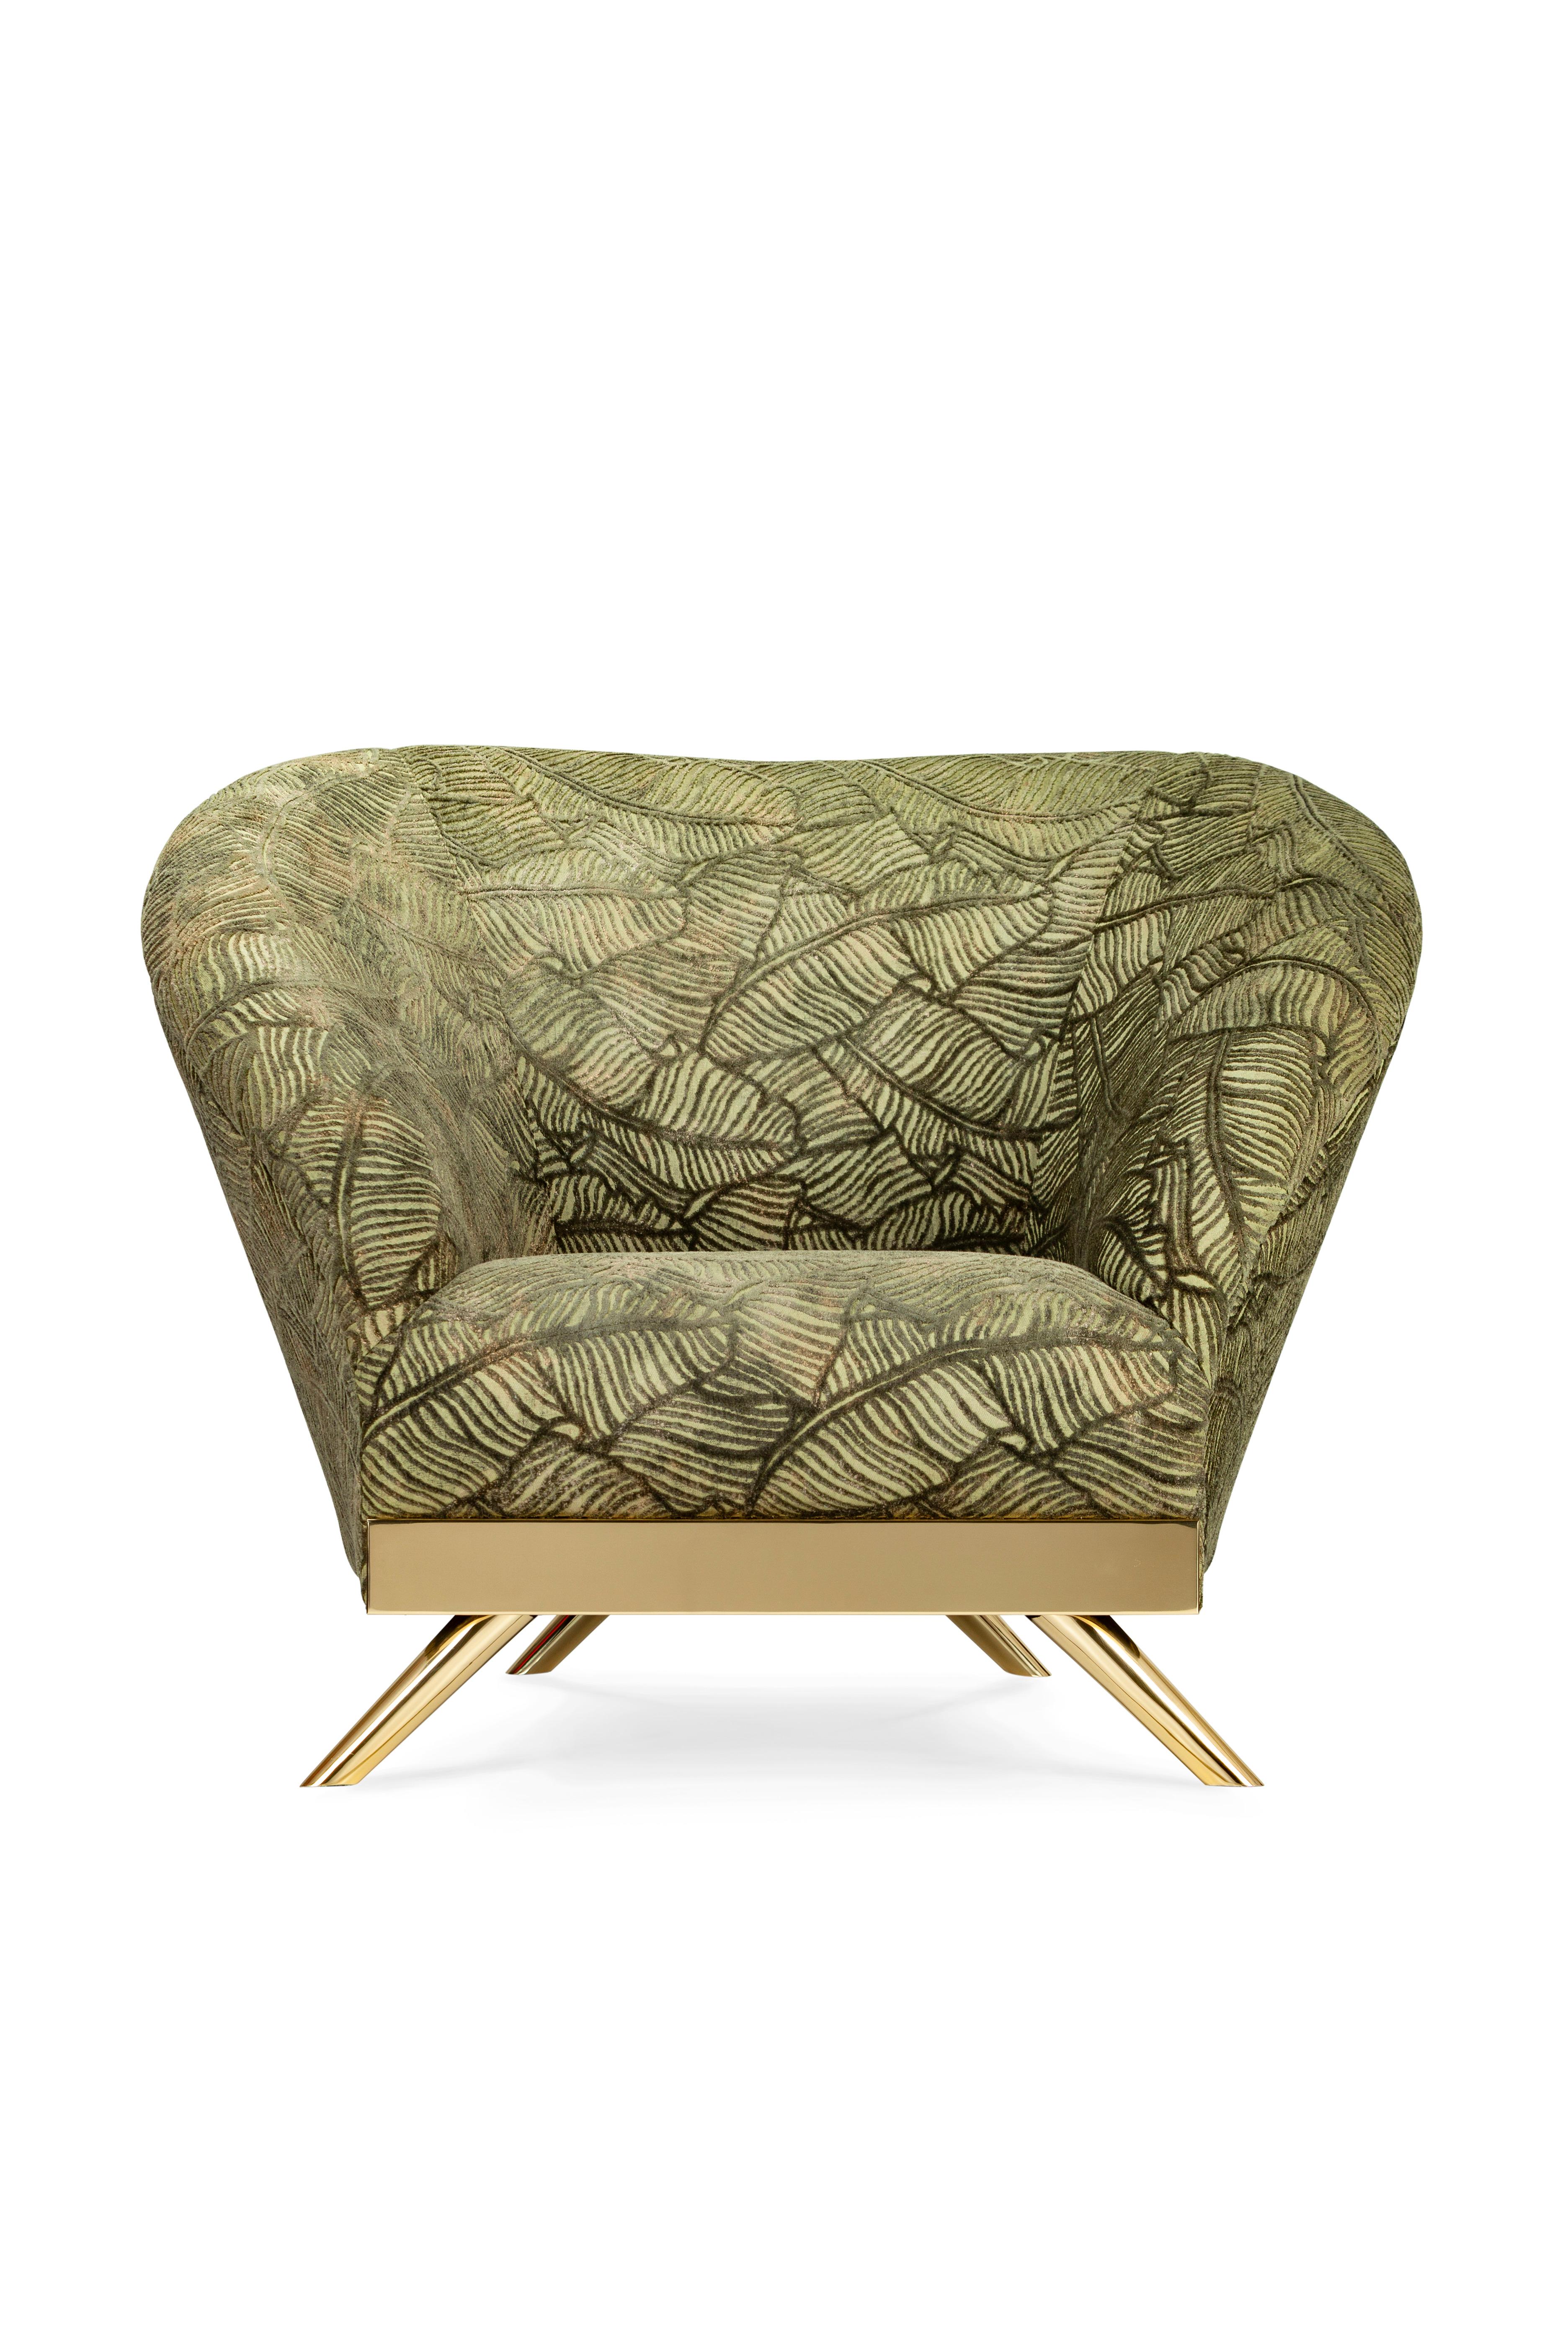 Cambridge armchair, Modern Collection, Handcrafted in Portugal - Europe by GF Modern.

With an elegant design inspired by the eternal surroundings of bohemian life, Cambridge exudes a stylish yet serene feel. The polished brass legs and structure